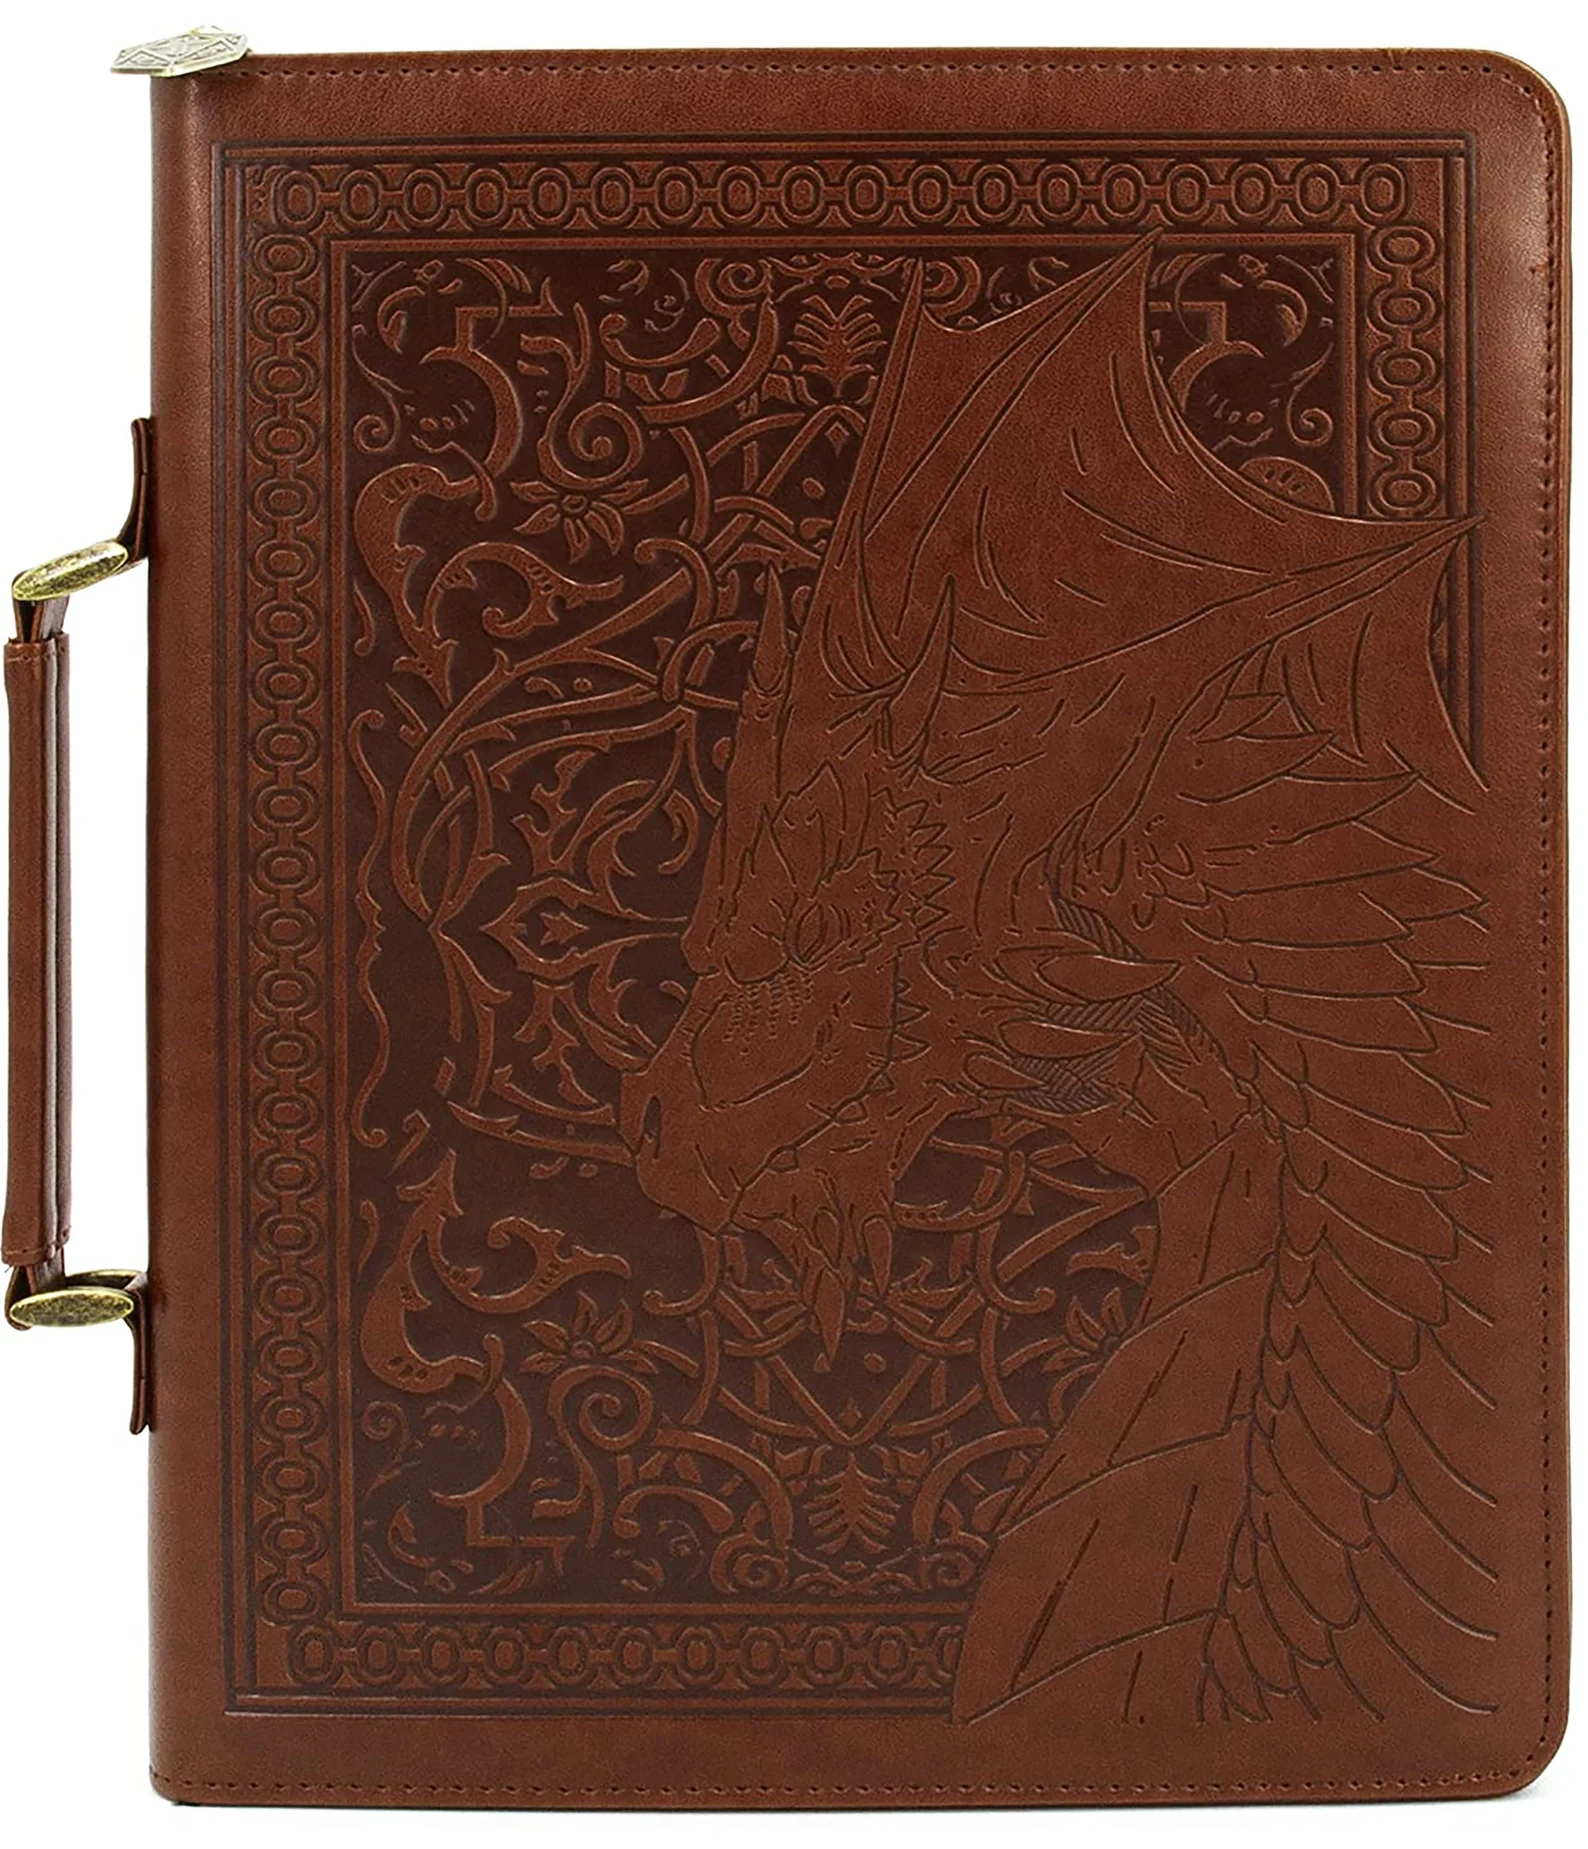 A photo of an 11-inch by 8.5-inch by 1-inch leather carrying case with a leather handle for a Table Top Role Playing Game Rule Book. The front of the book is engraved with the profile of a dragon and swirls. 